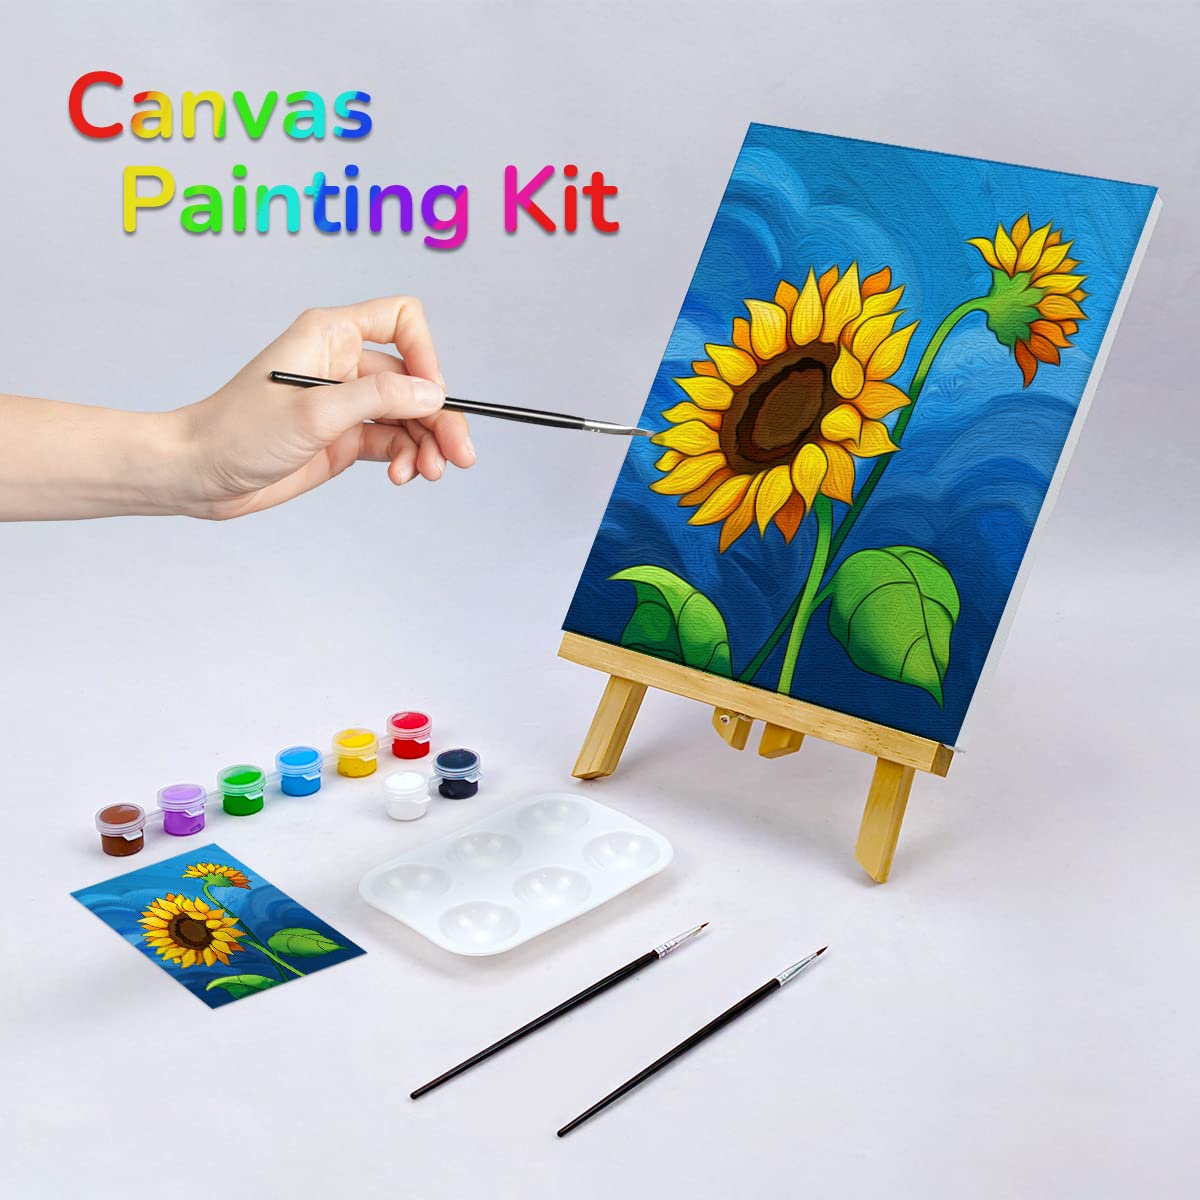  Pre Drawn Paint Canvas Kit for Painting for Adults